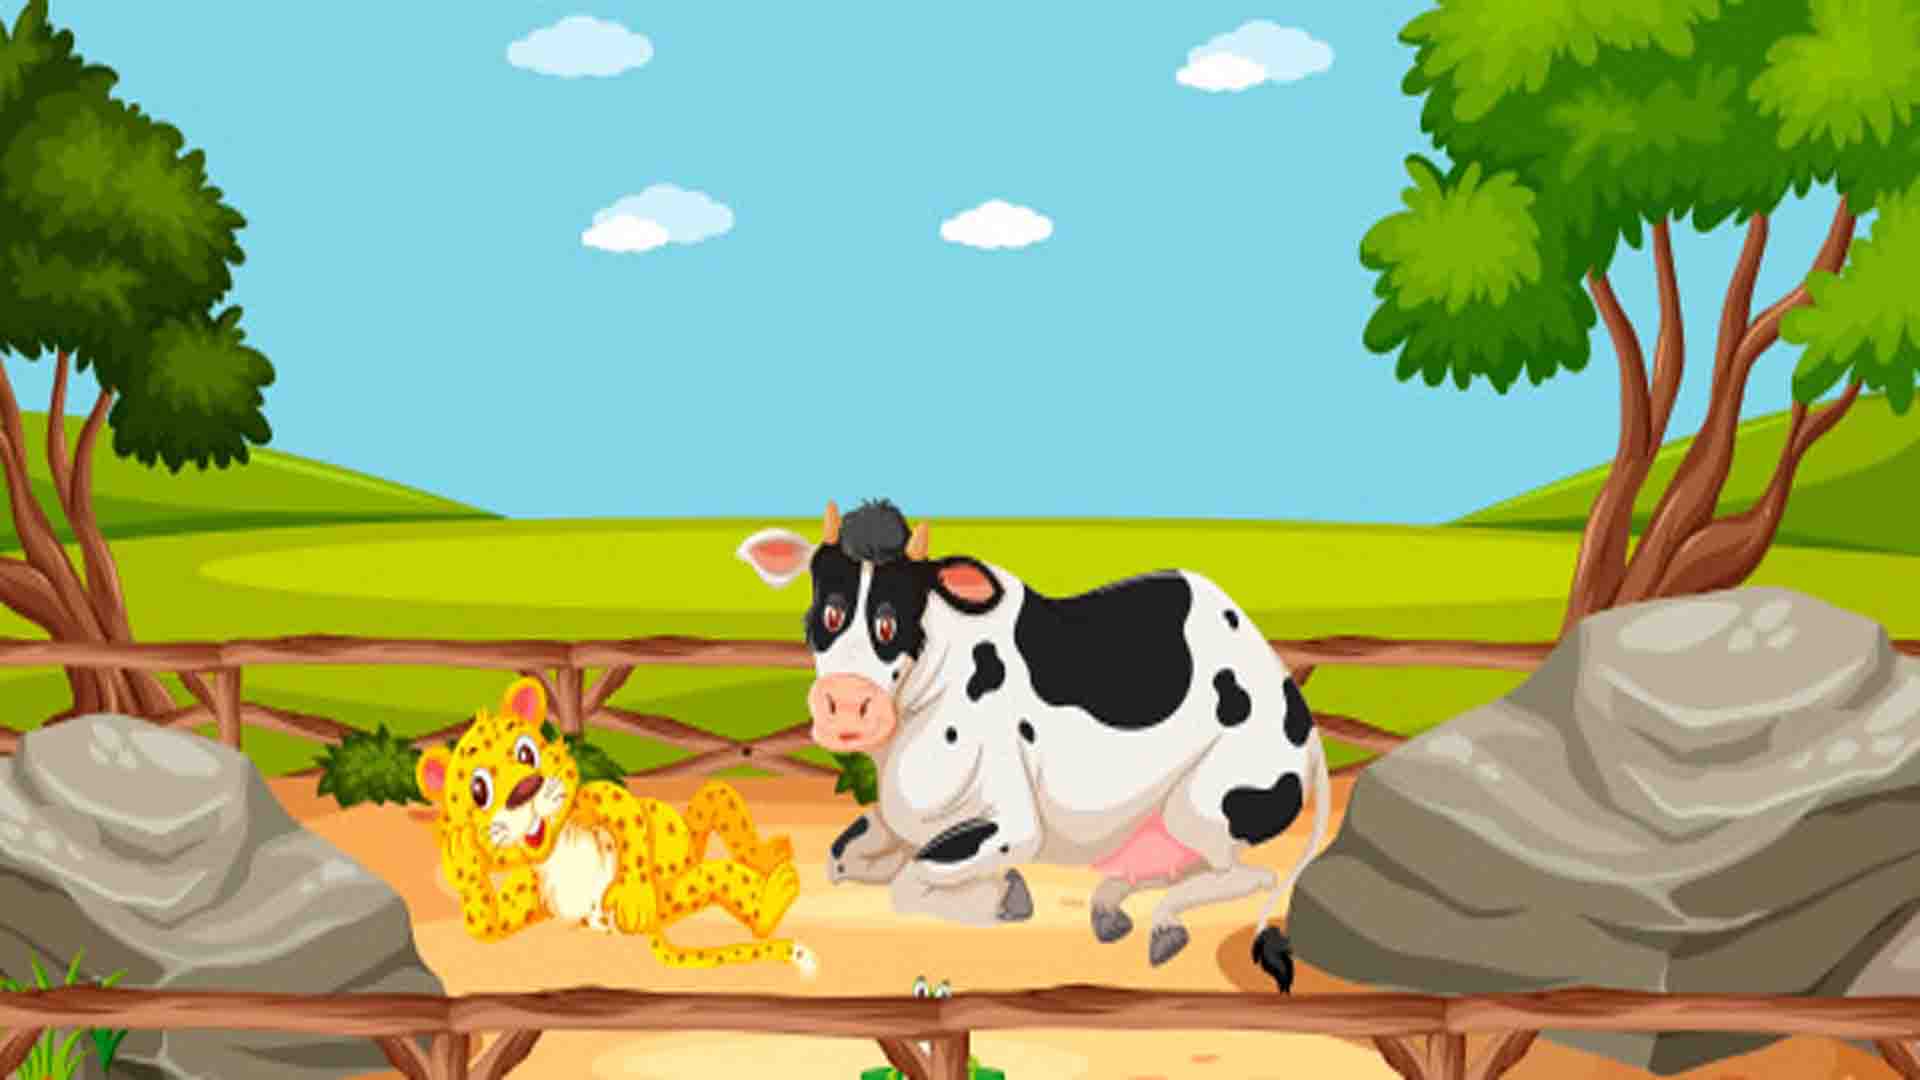 The tiger and the cow short story for kids | Stories for Kids